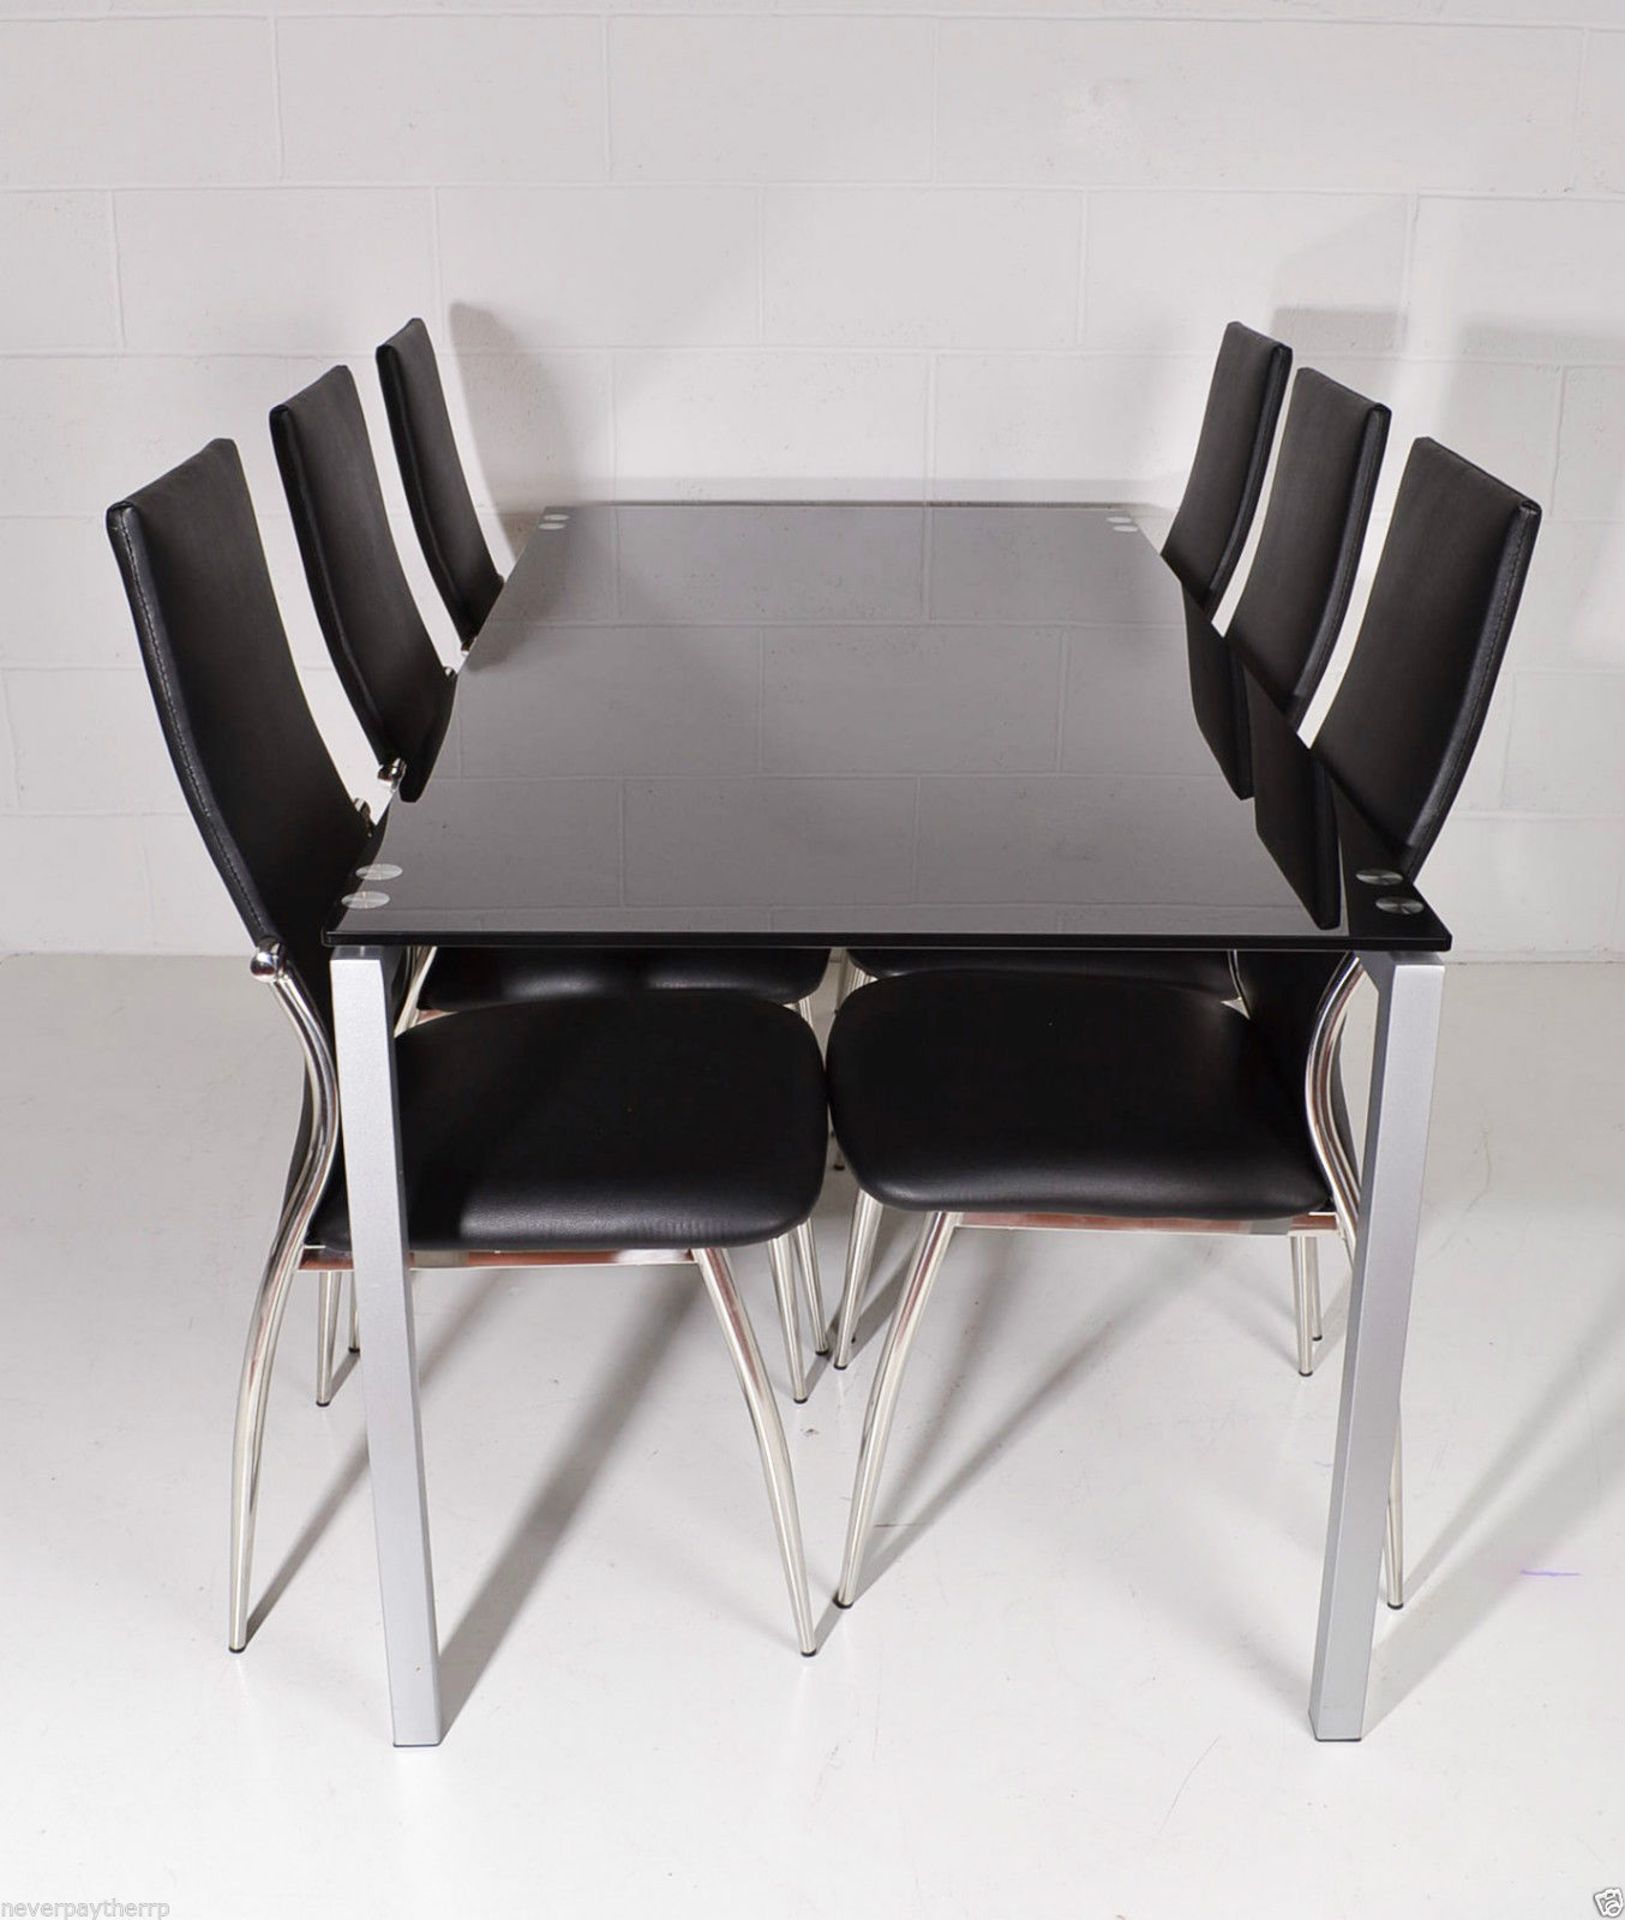 NEW Birlea Black Glass & Chrome Dining Table Set with 4 (not 6) Black Chairs. New set. Glass top